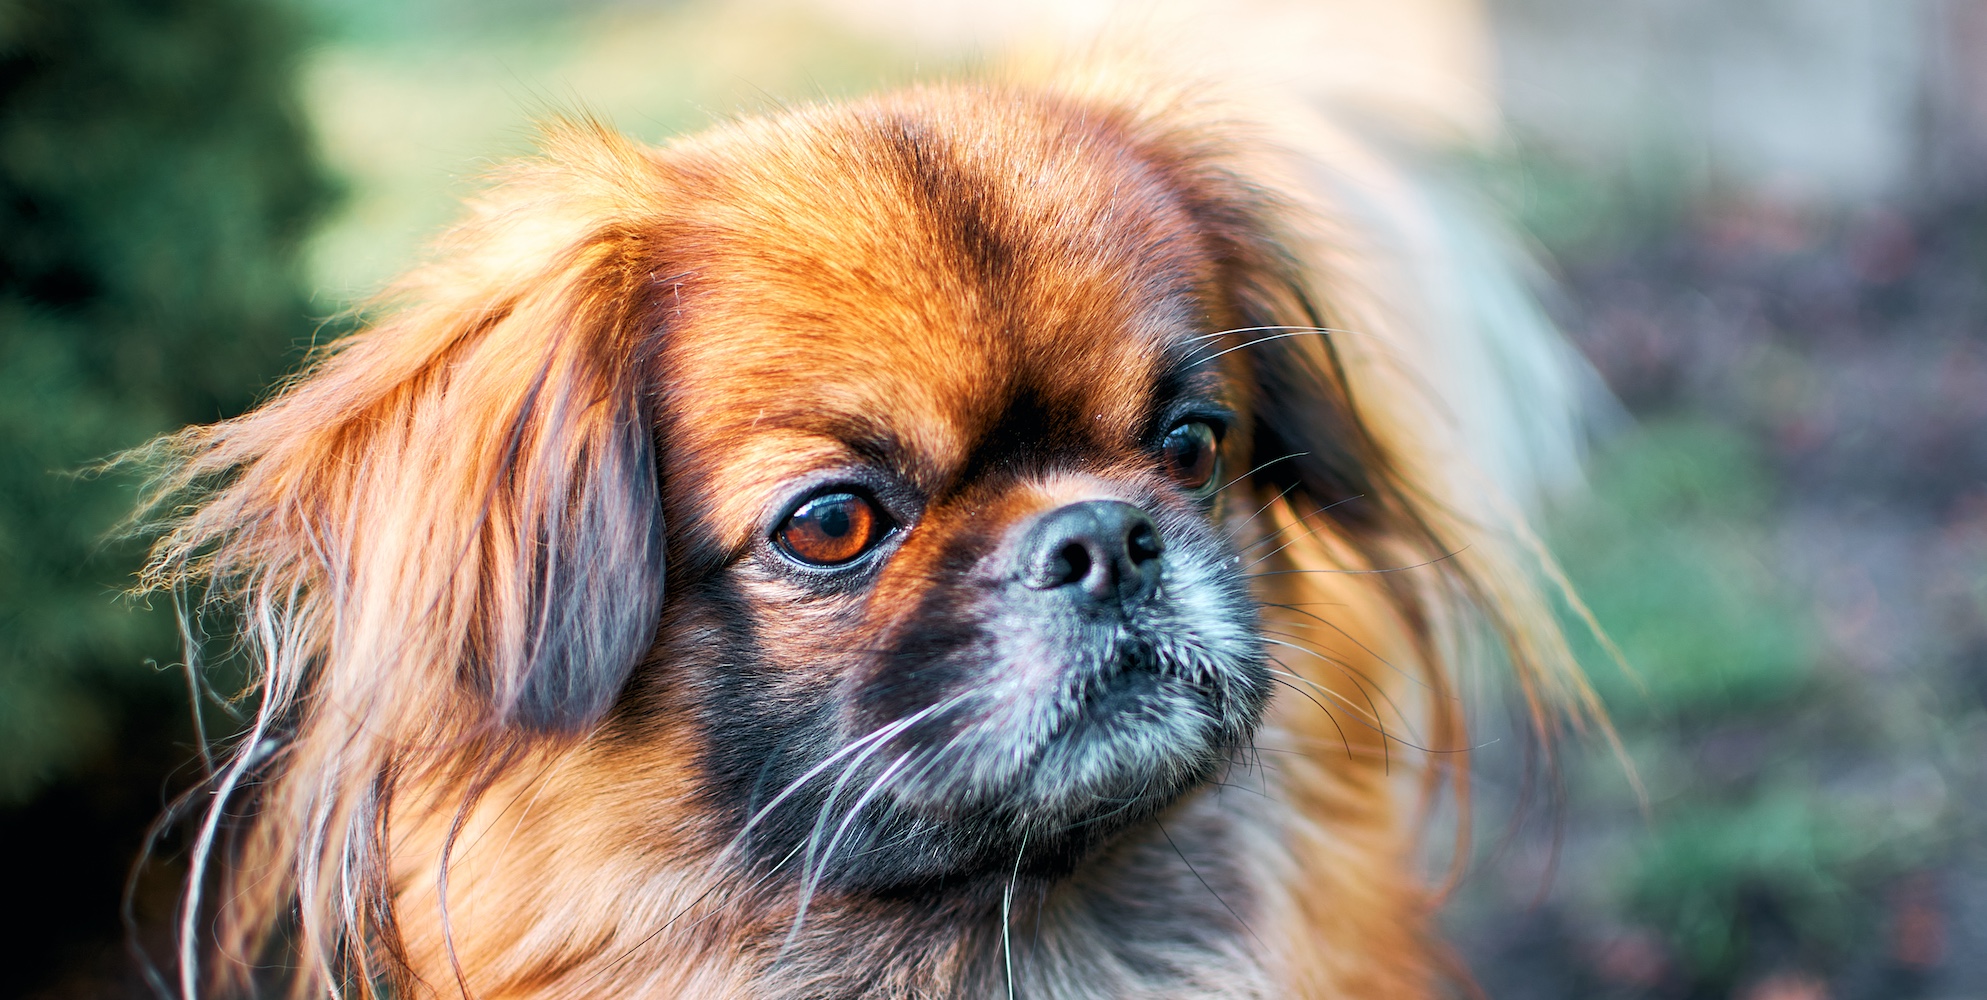 The Pekingese Guide: Personality, History, Training, Food, and More